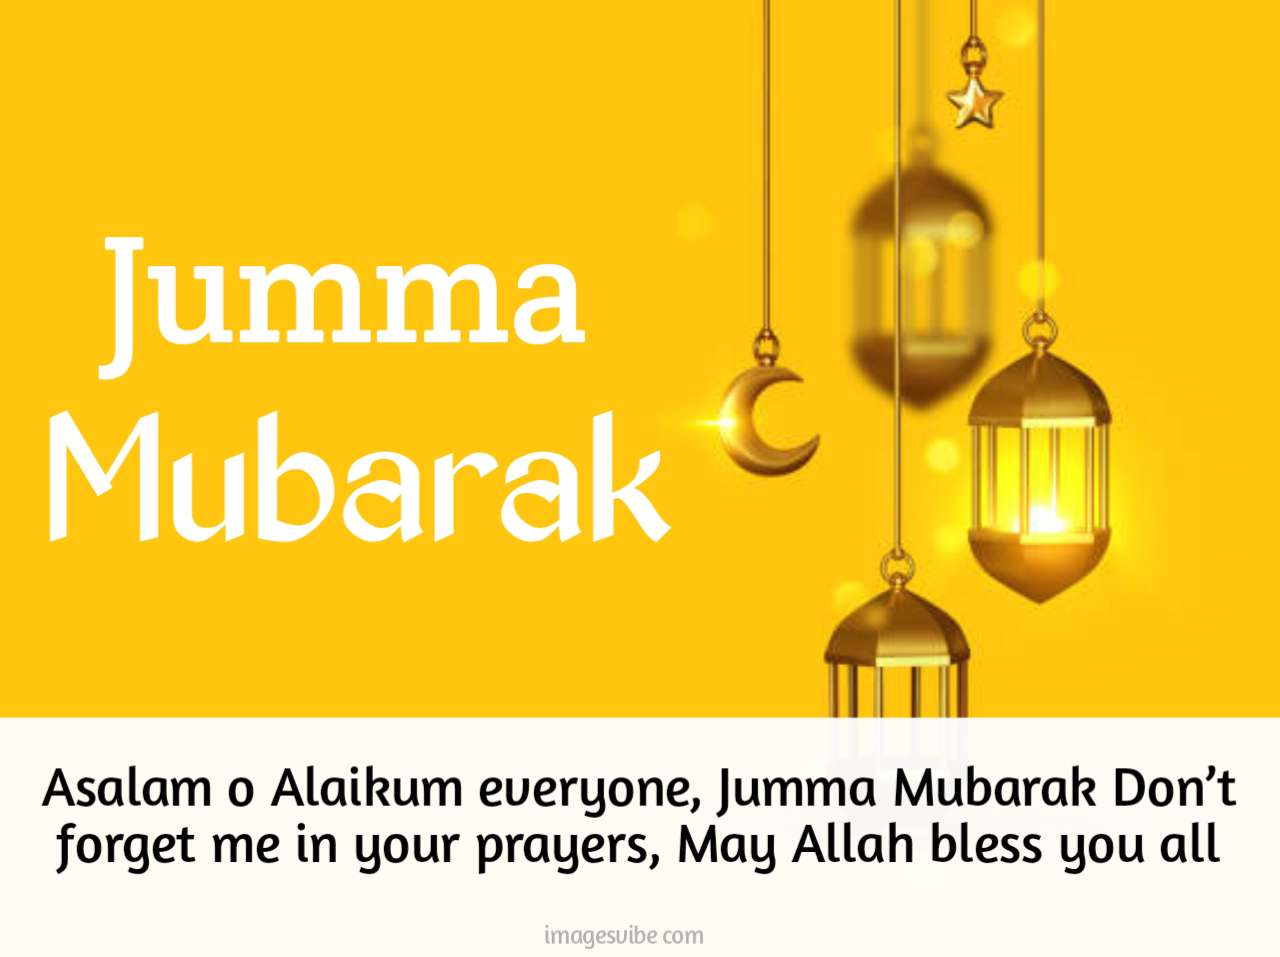 Best Jumma Mubarak Images Quotes & Messages in 2023 - Images Vibe